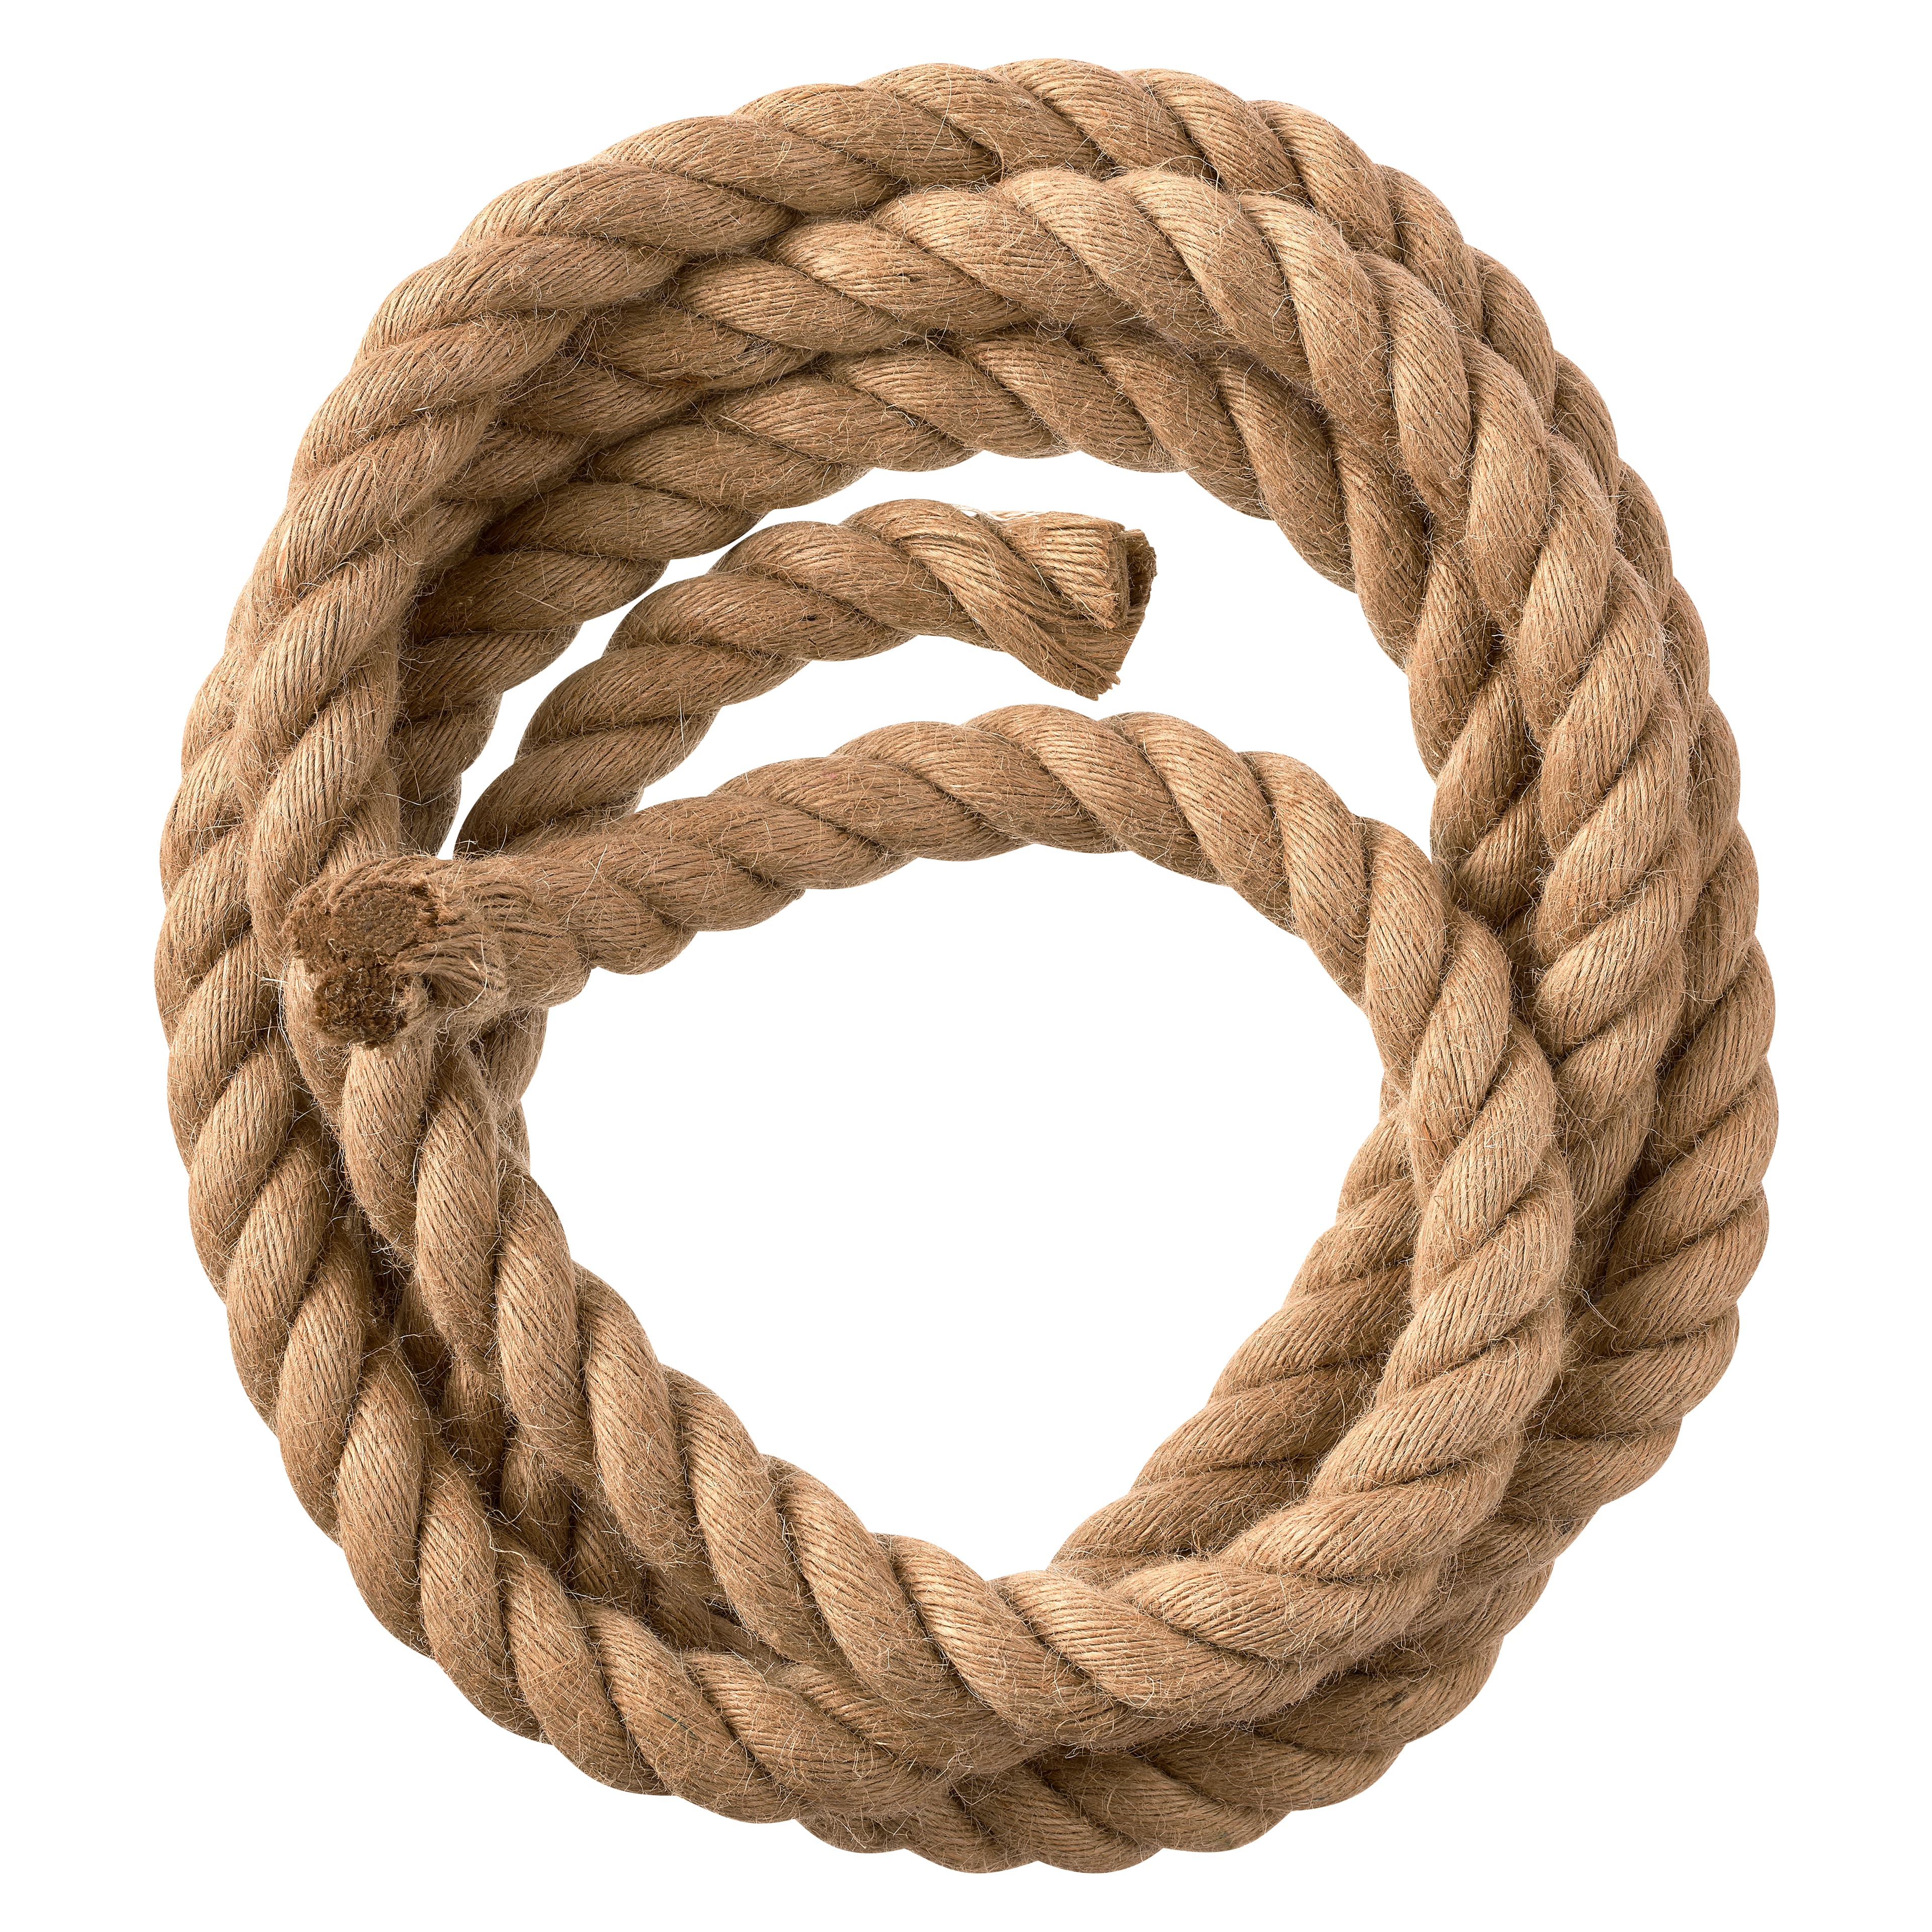 7ft. Natural Jute Rope by Ashland®